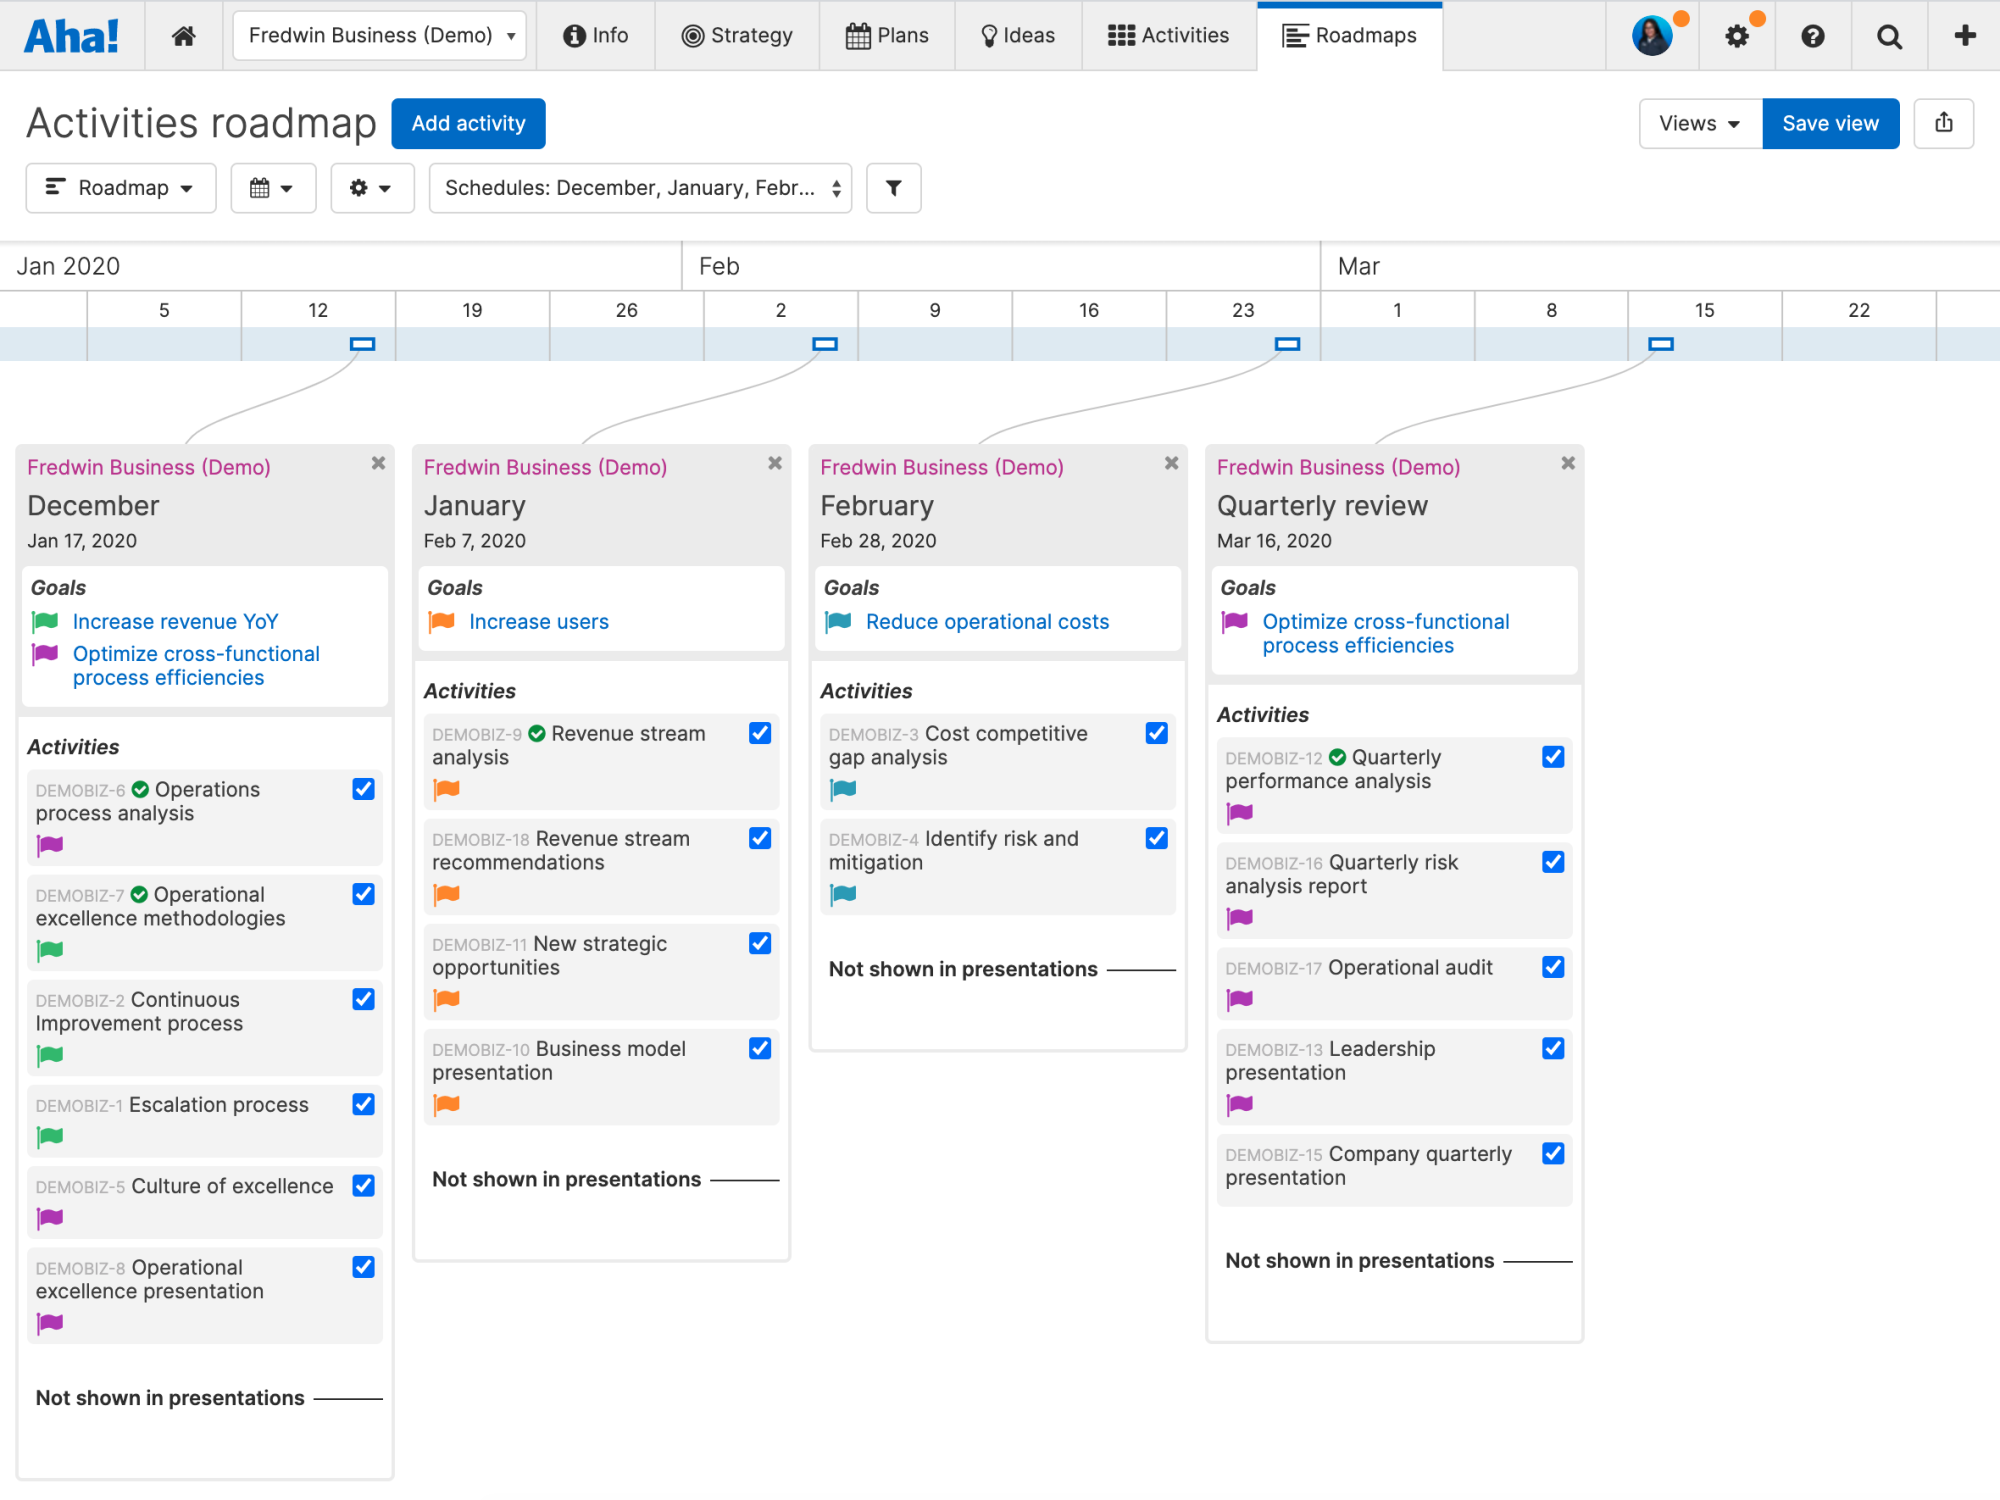 Activities roadmap in the business operations workspace.